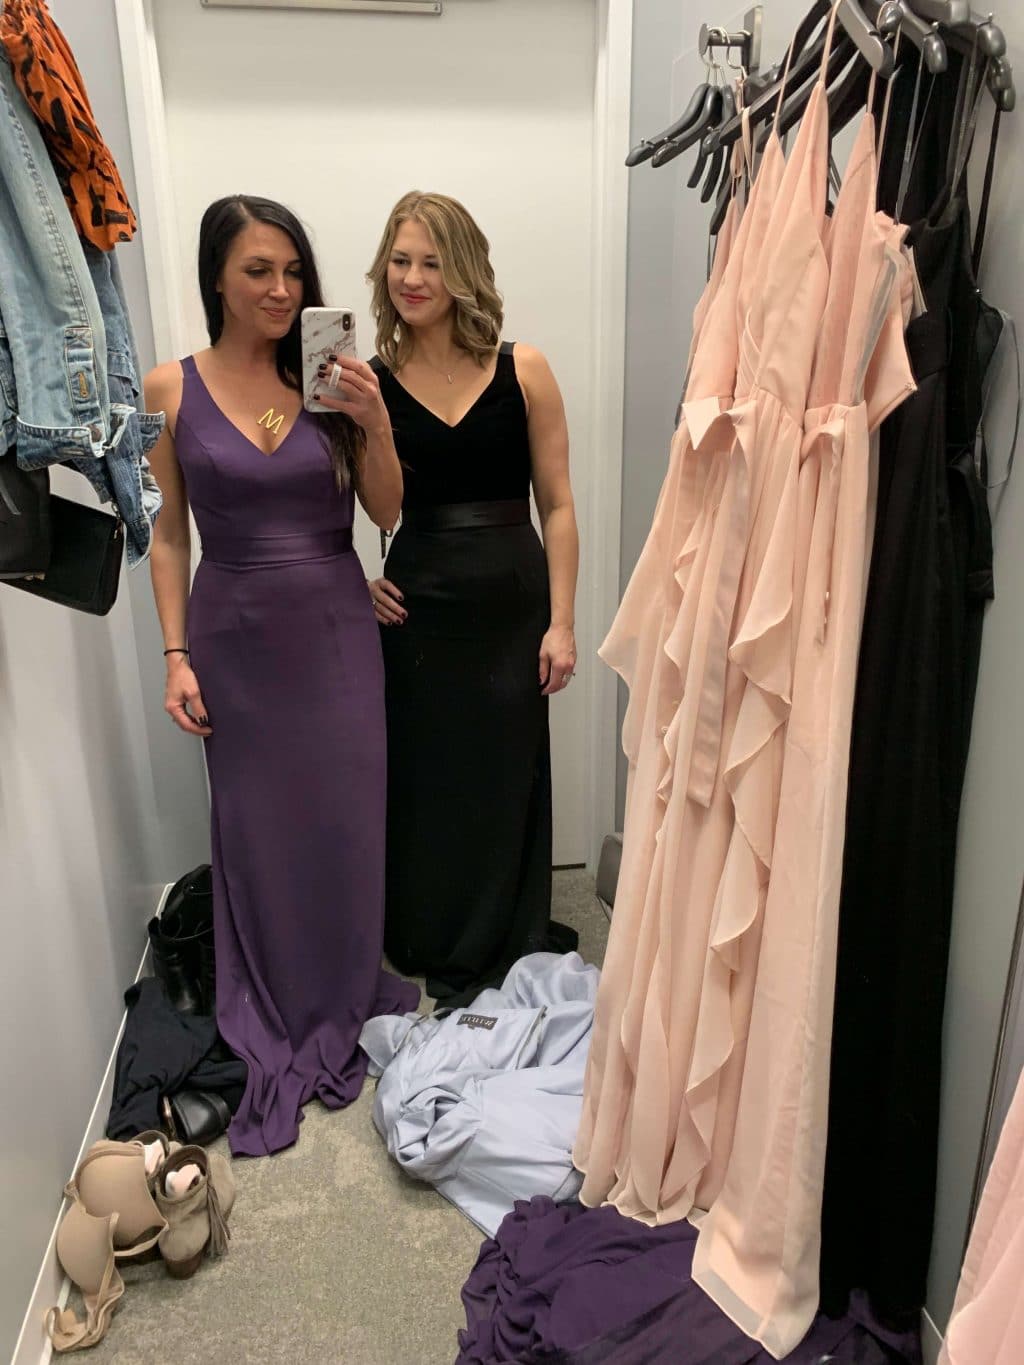 Wedding Dress Shopping, Sisters, Bridesmaid dresses, Stilettos and Diapers